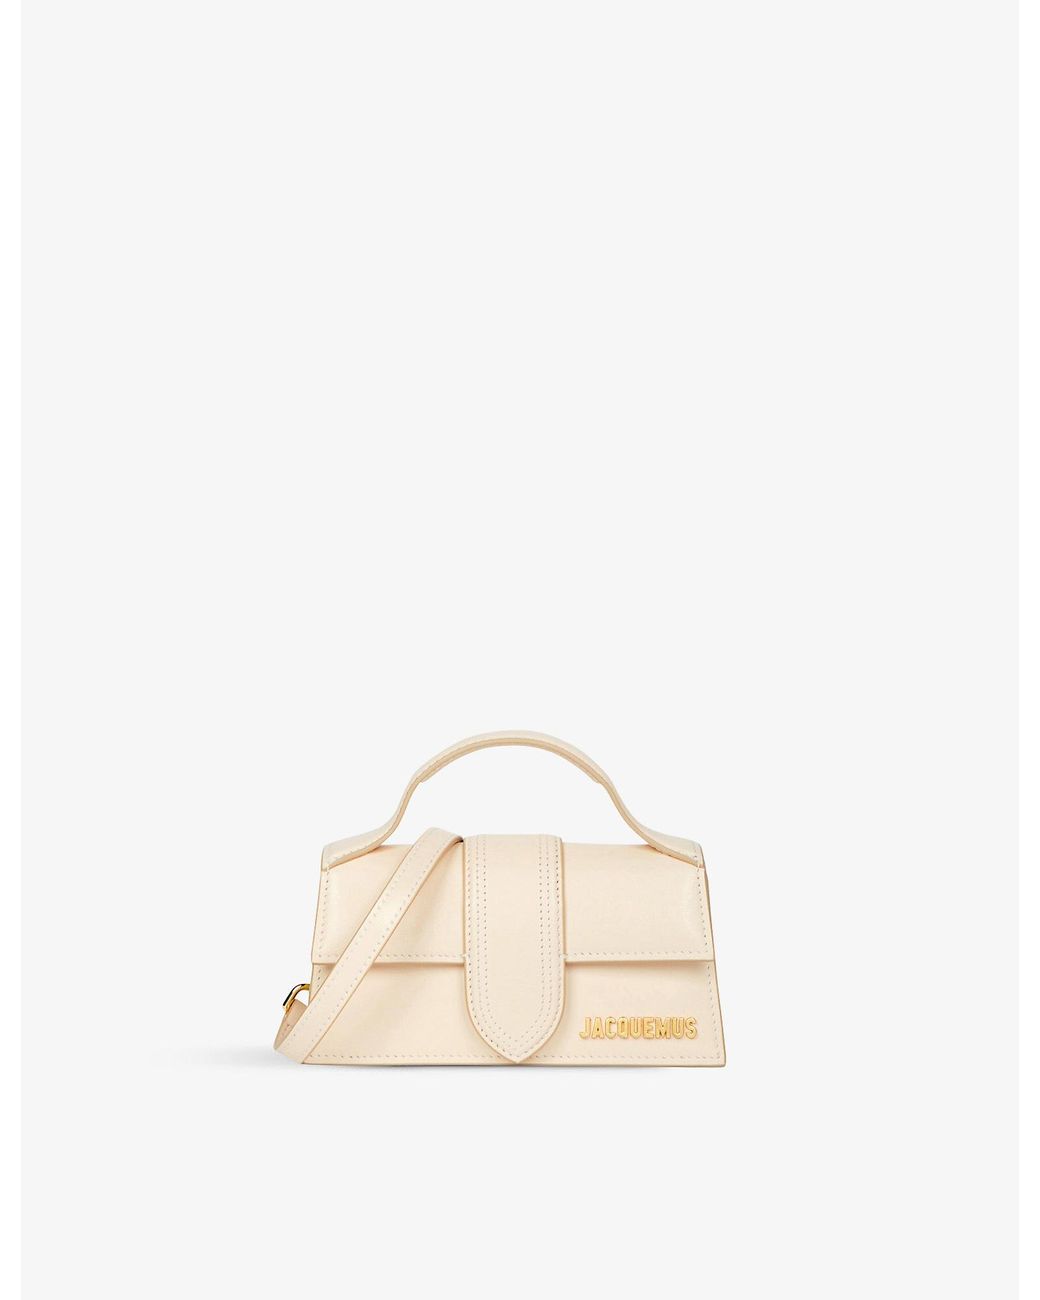 Jacquemus Le Bambino Mini Leather Cross-body Bag in Ivory (White ...